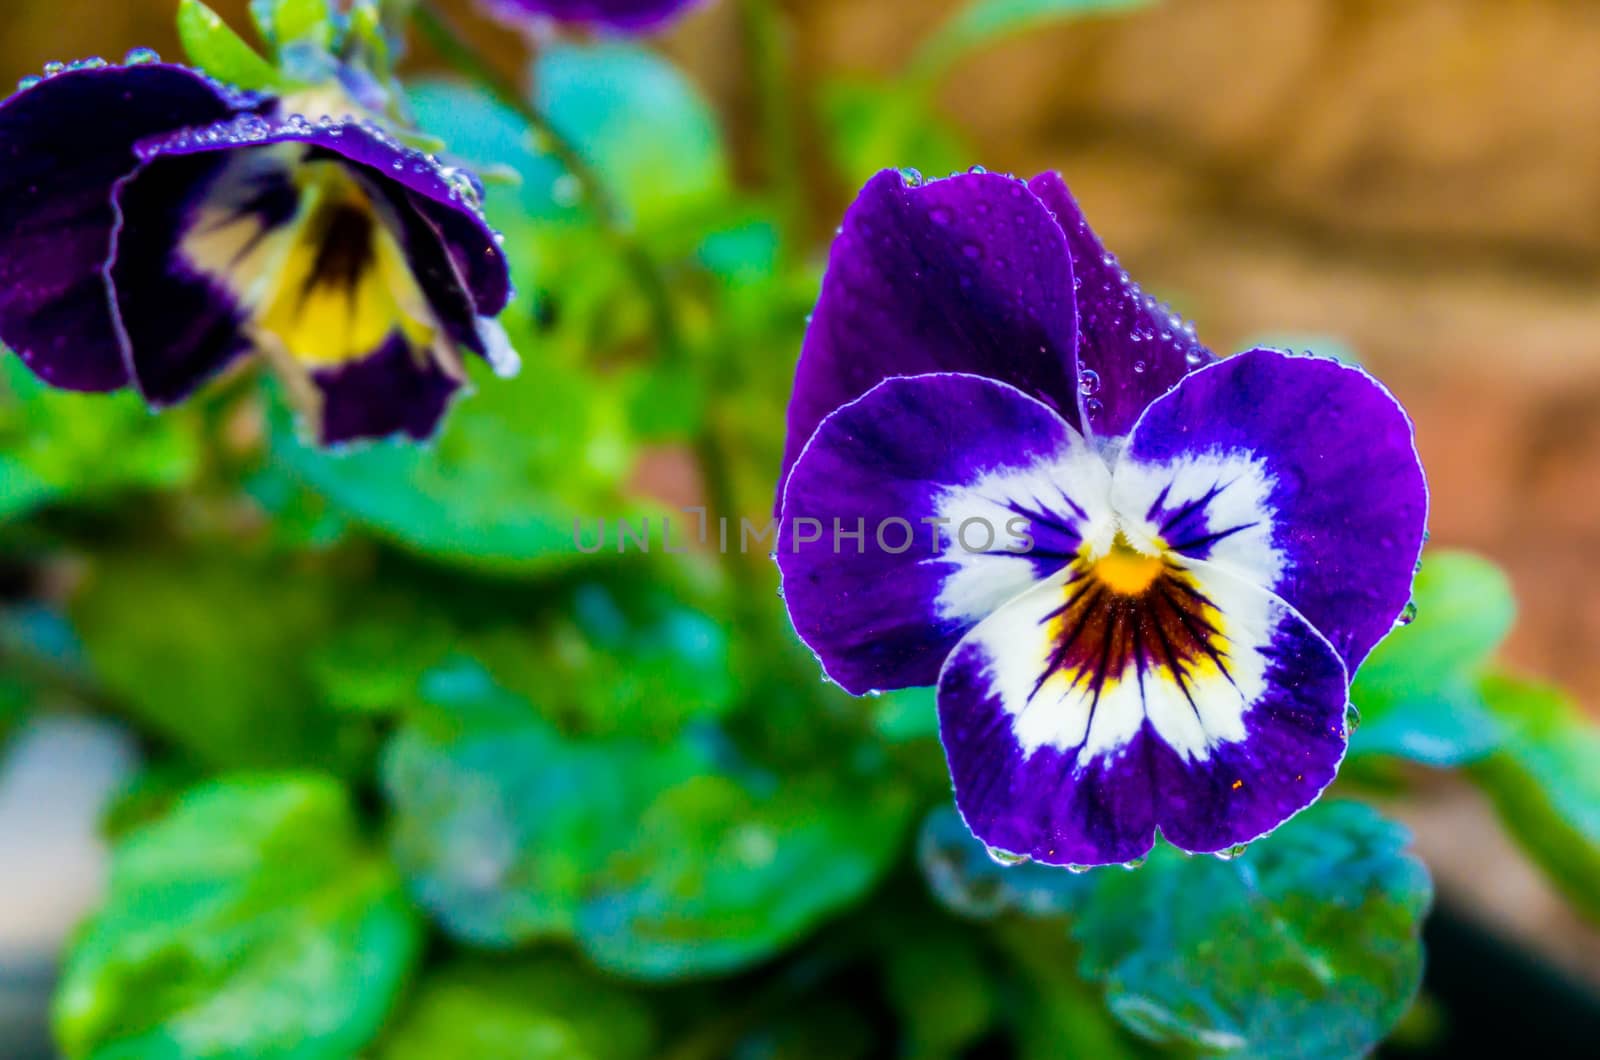 wet violet garden pansy flower covered in raindrops giving a beautiful effect macro close up nature background by charlottebleijenberg